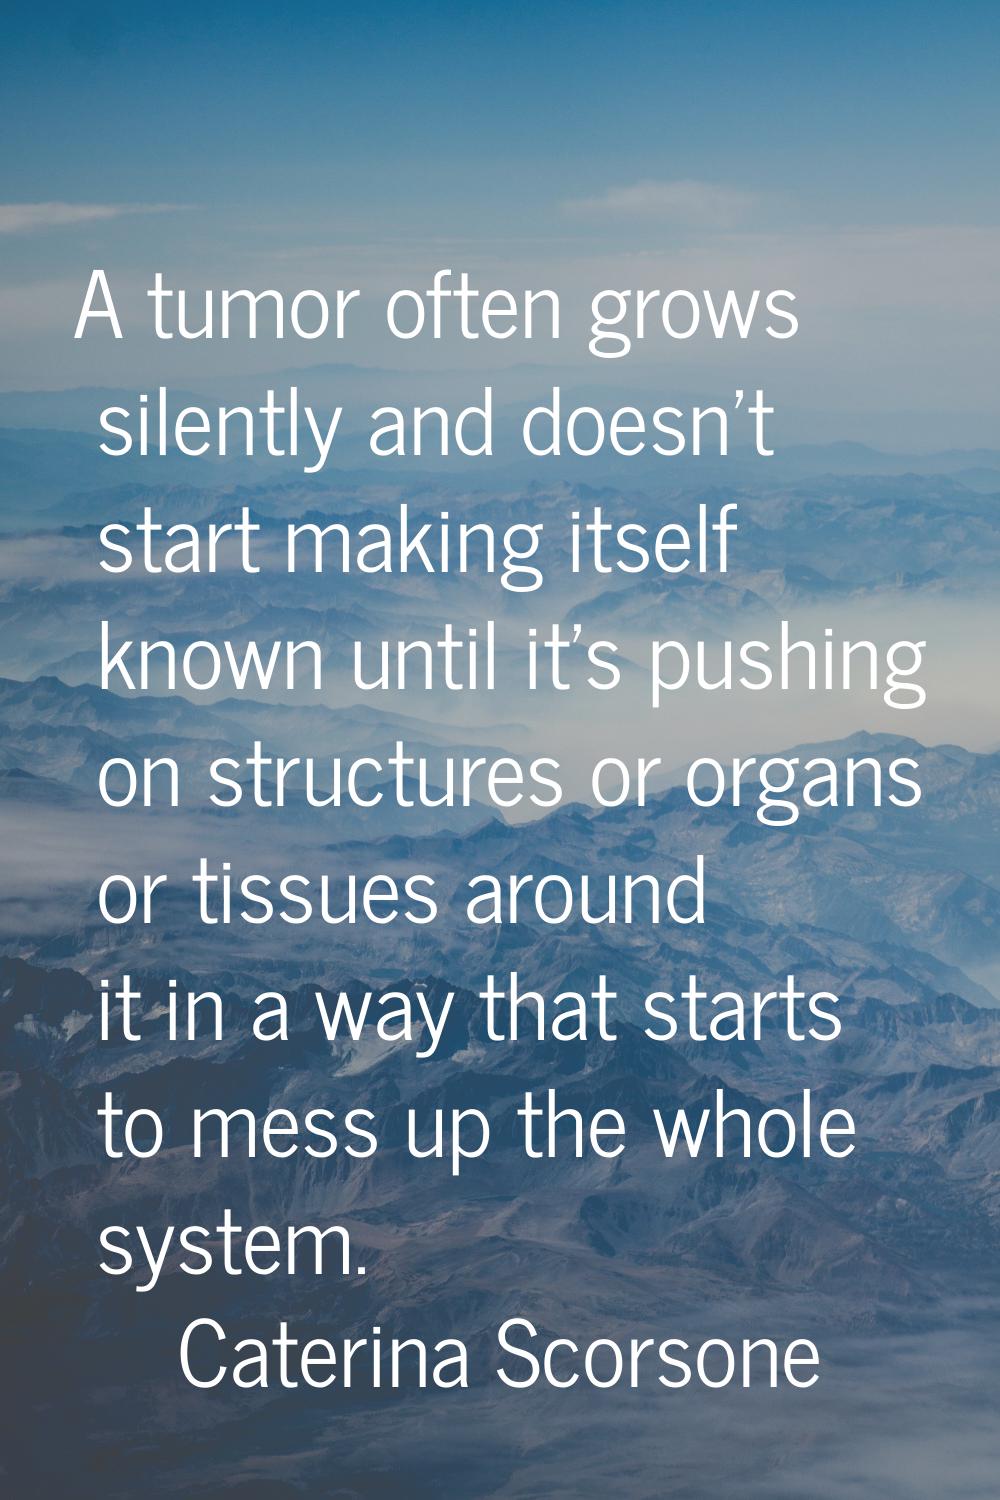 A tumor often grows silently and doesn't start making itself known until it's pushing on structures